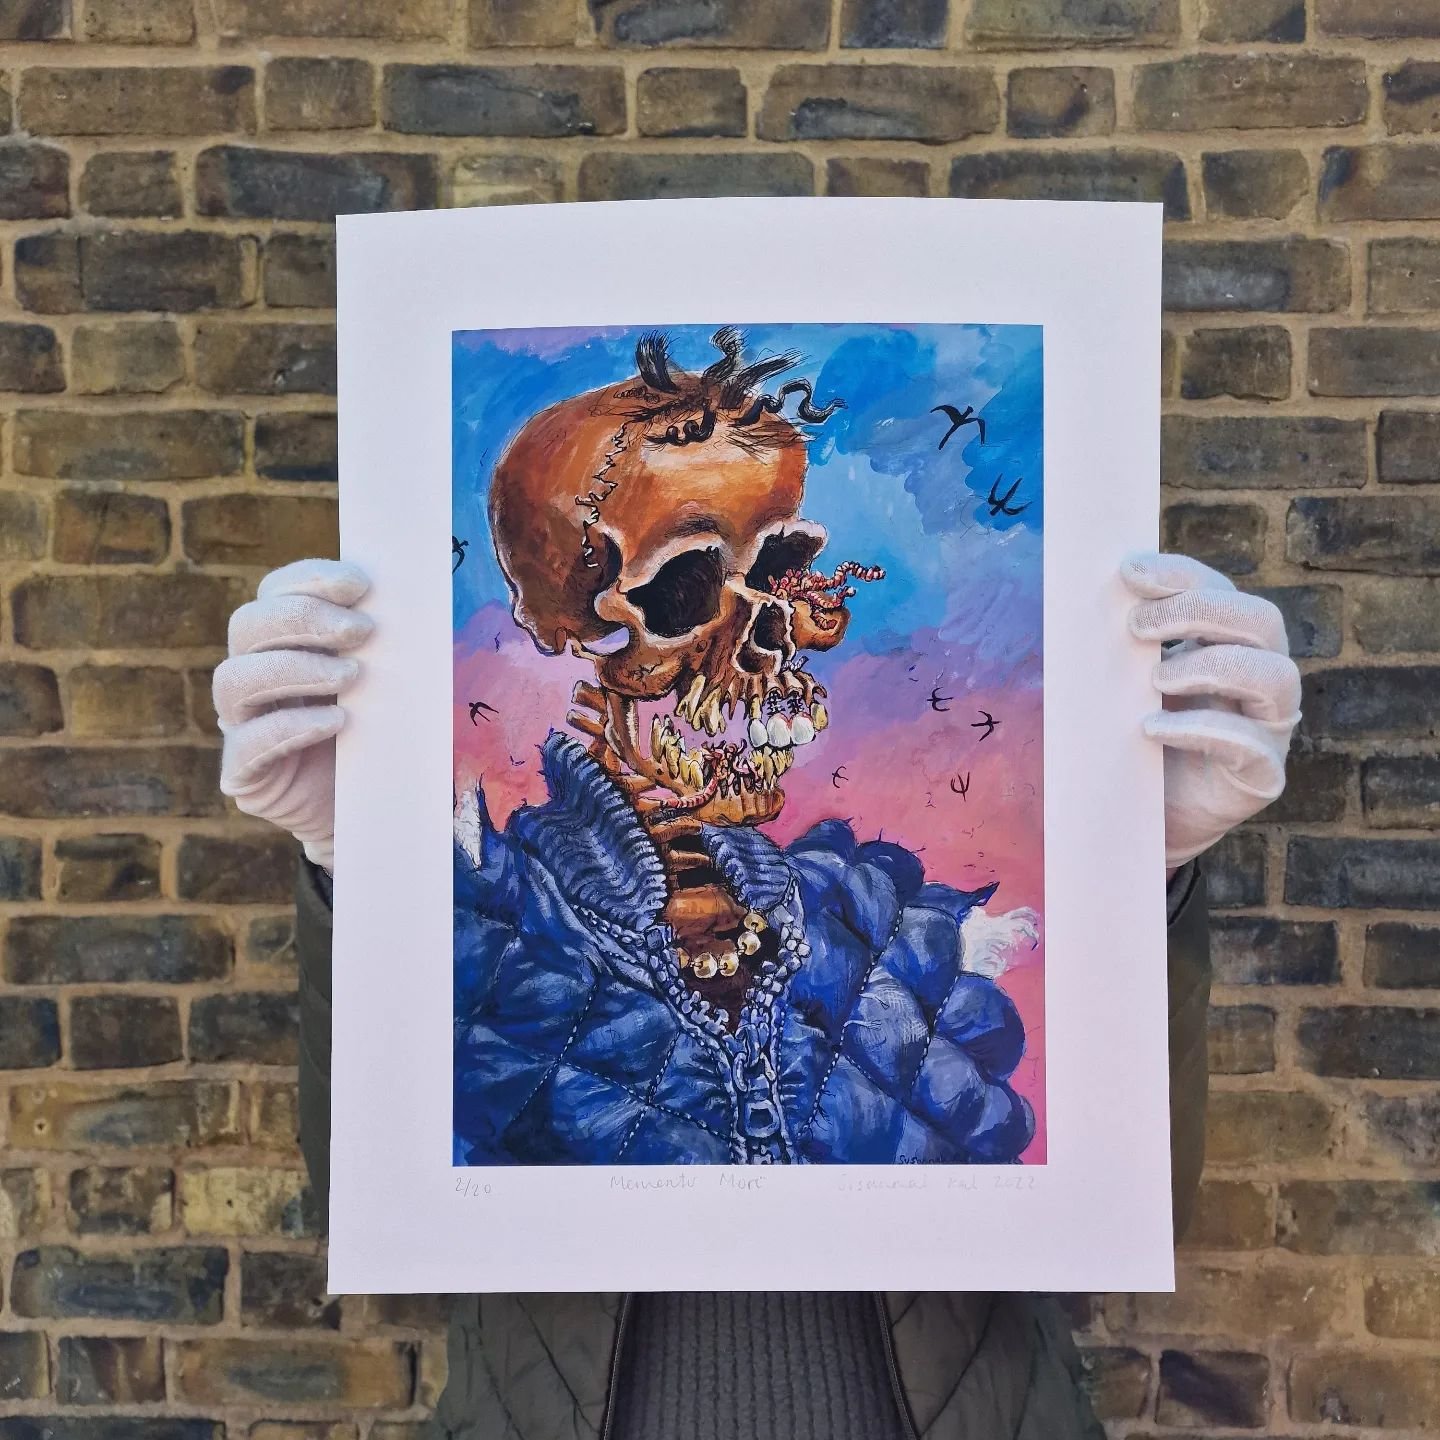 @xennial_gallery 

&quot;Momento Mori.&quot;

Edition 2/20 by artist by @susannah__pal

Limited edition print in paper size, 338mm x438mm.

#xennialgallery #bexleyvillage #londongallery #artcollection #limitededitionprints #artcollector #artoninstagr